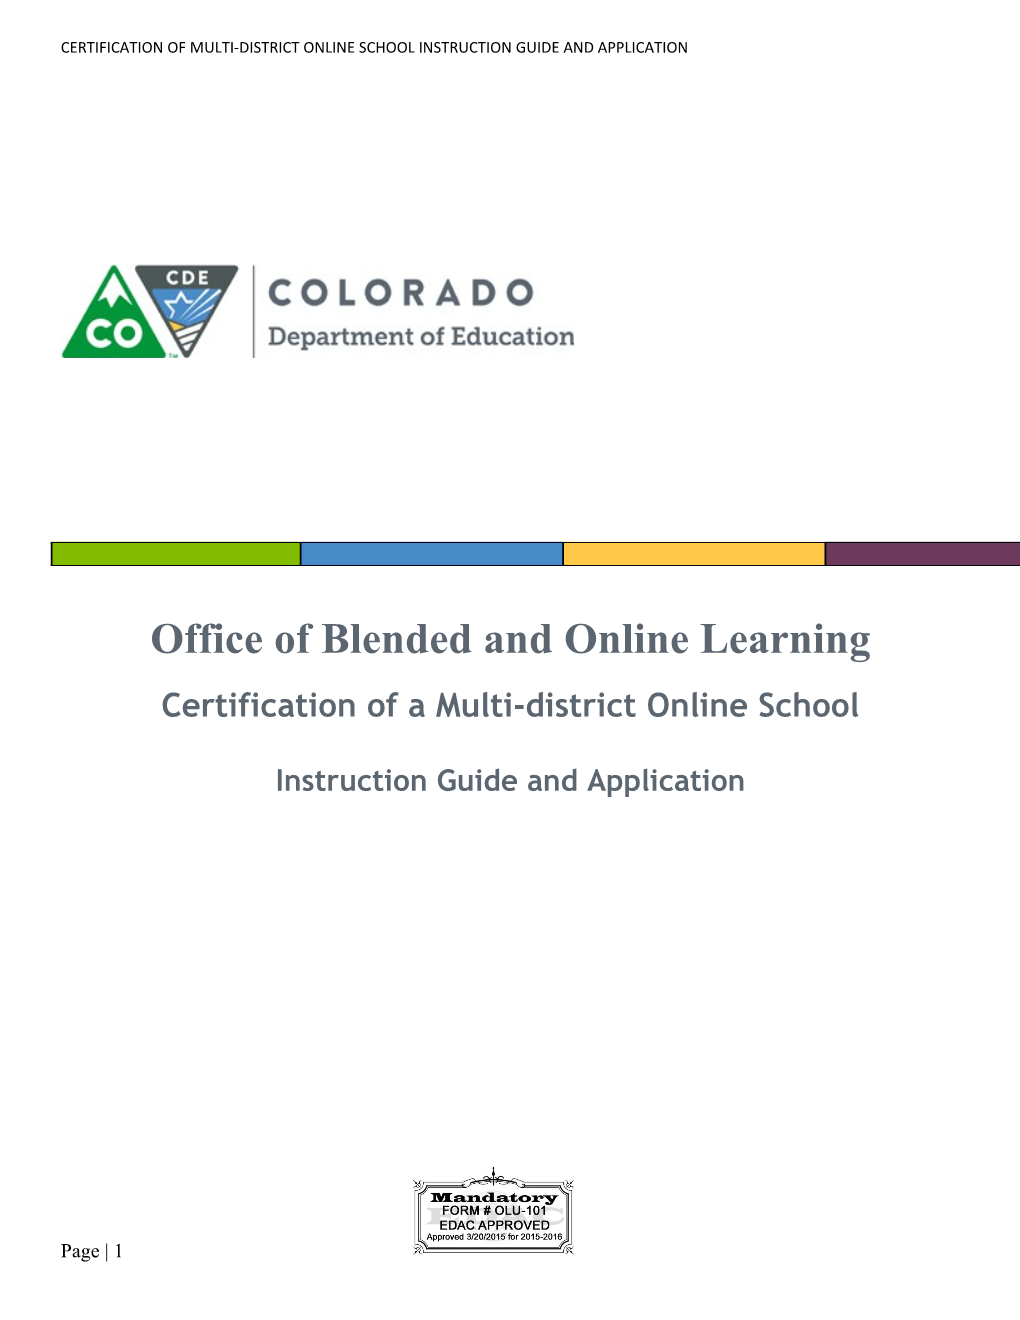 Certification of Multi-District Online School Instruction Guide and Application